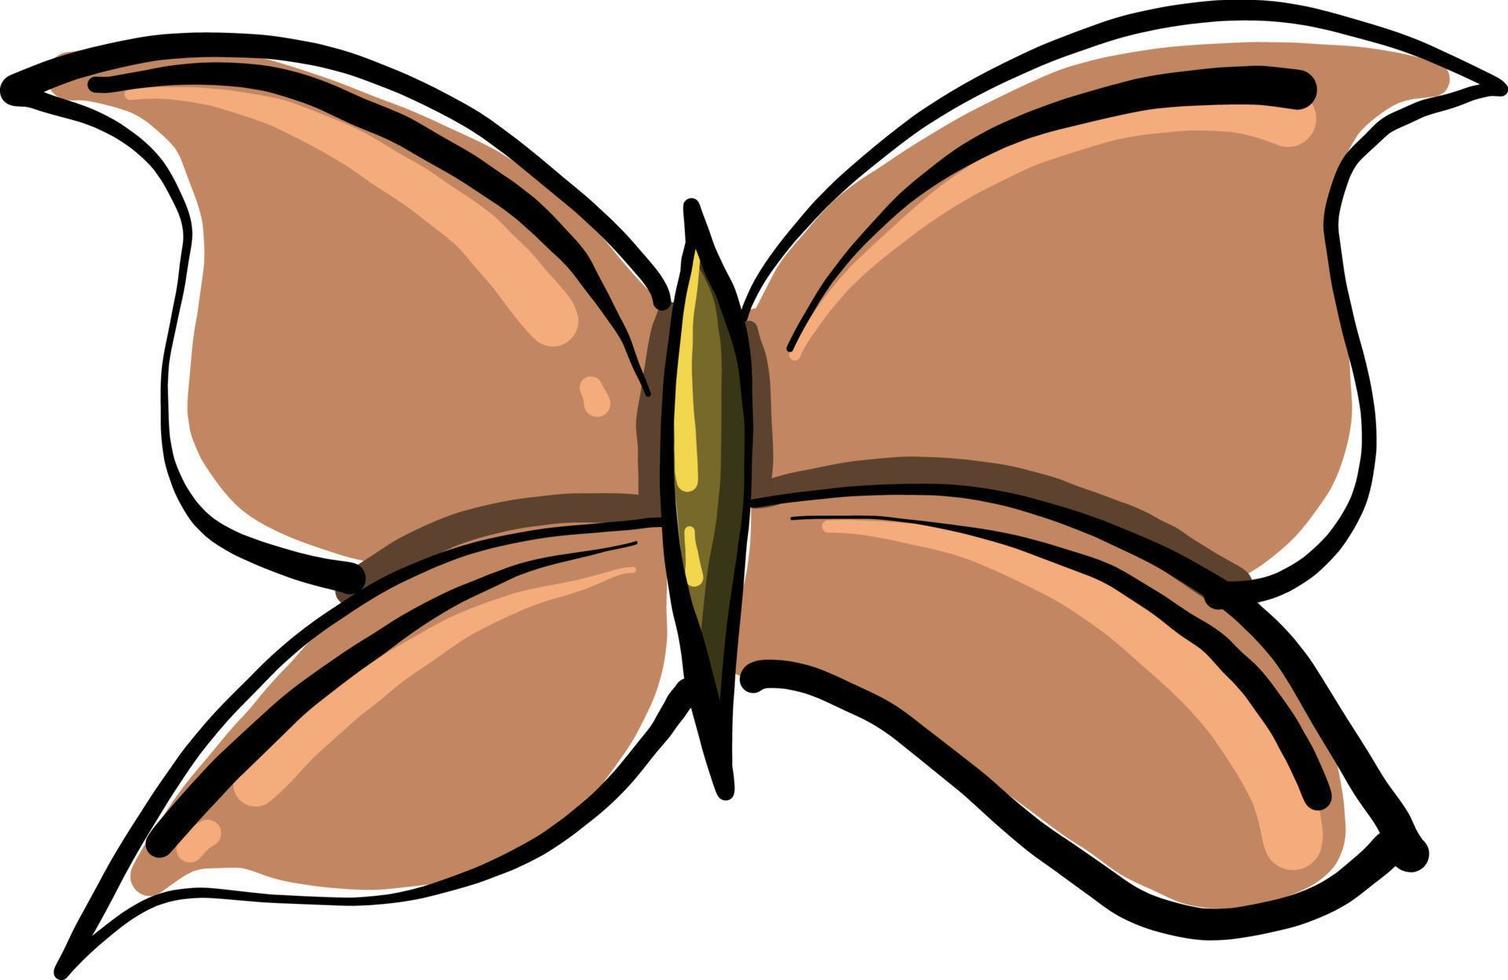 Beige butterfly, illustration, vector on white background.